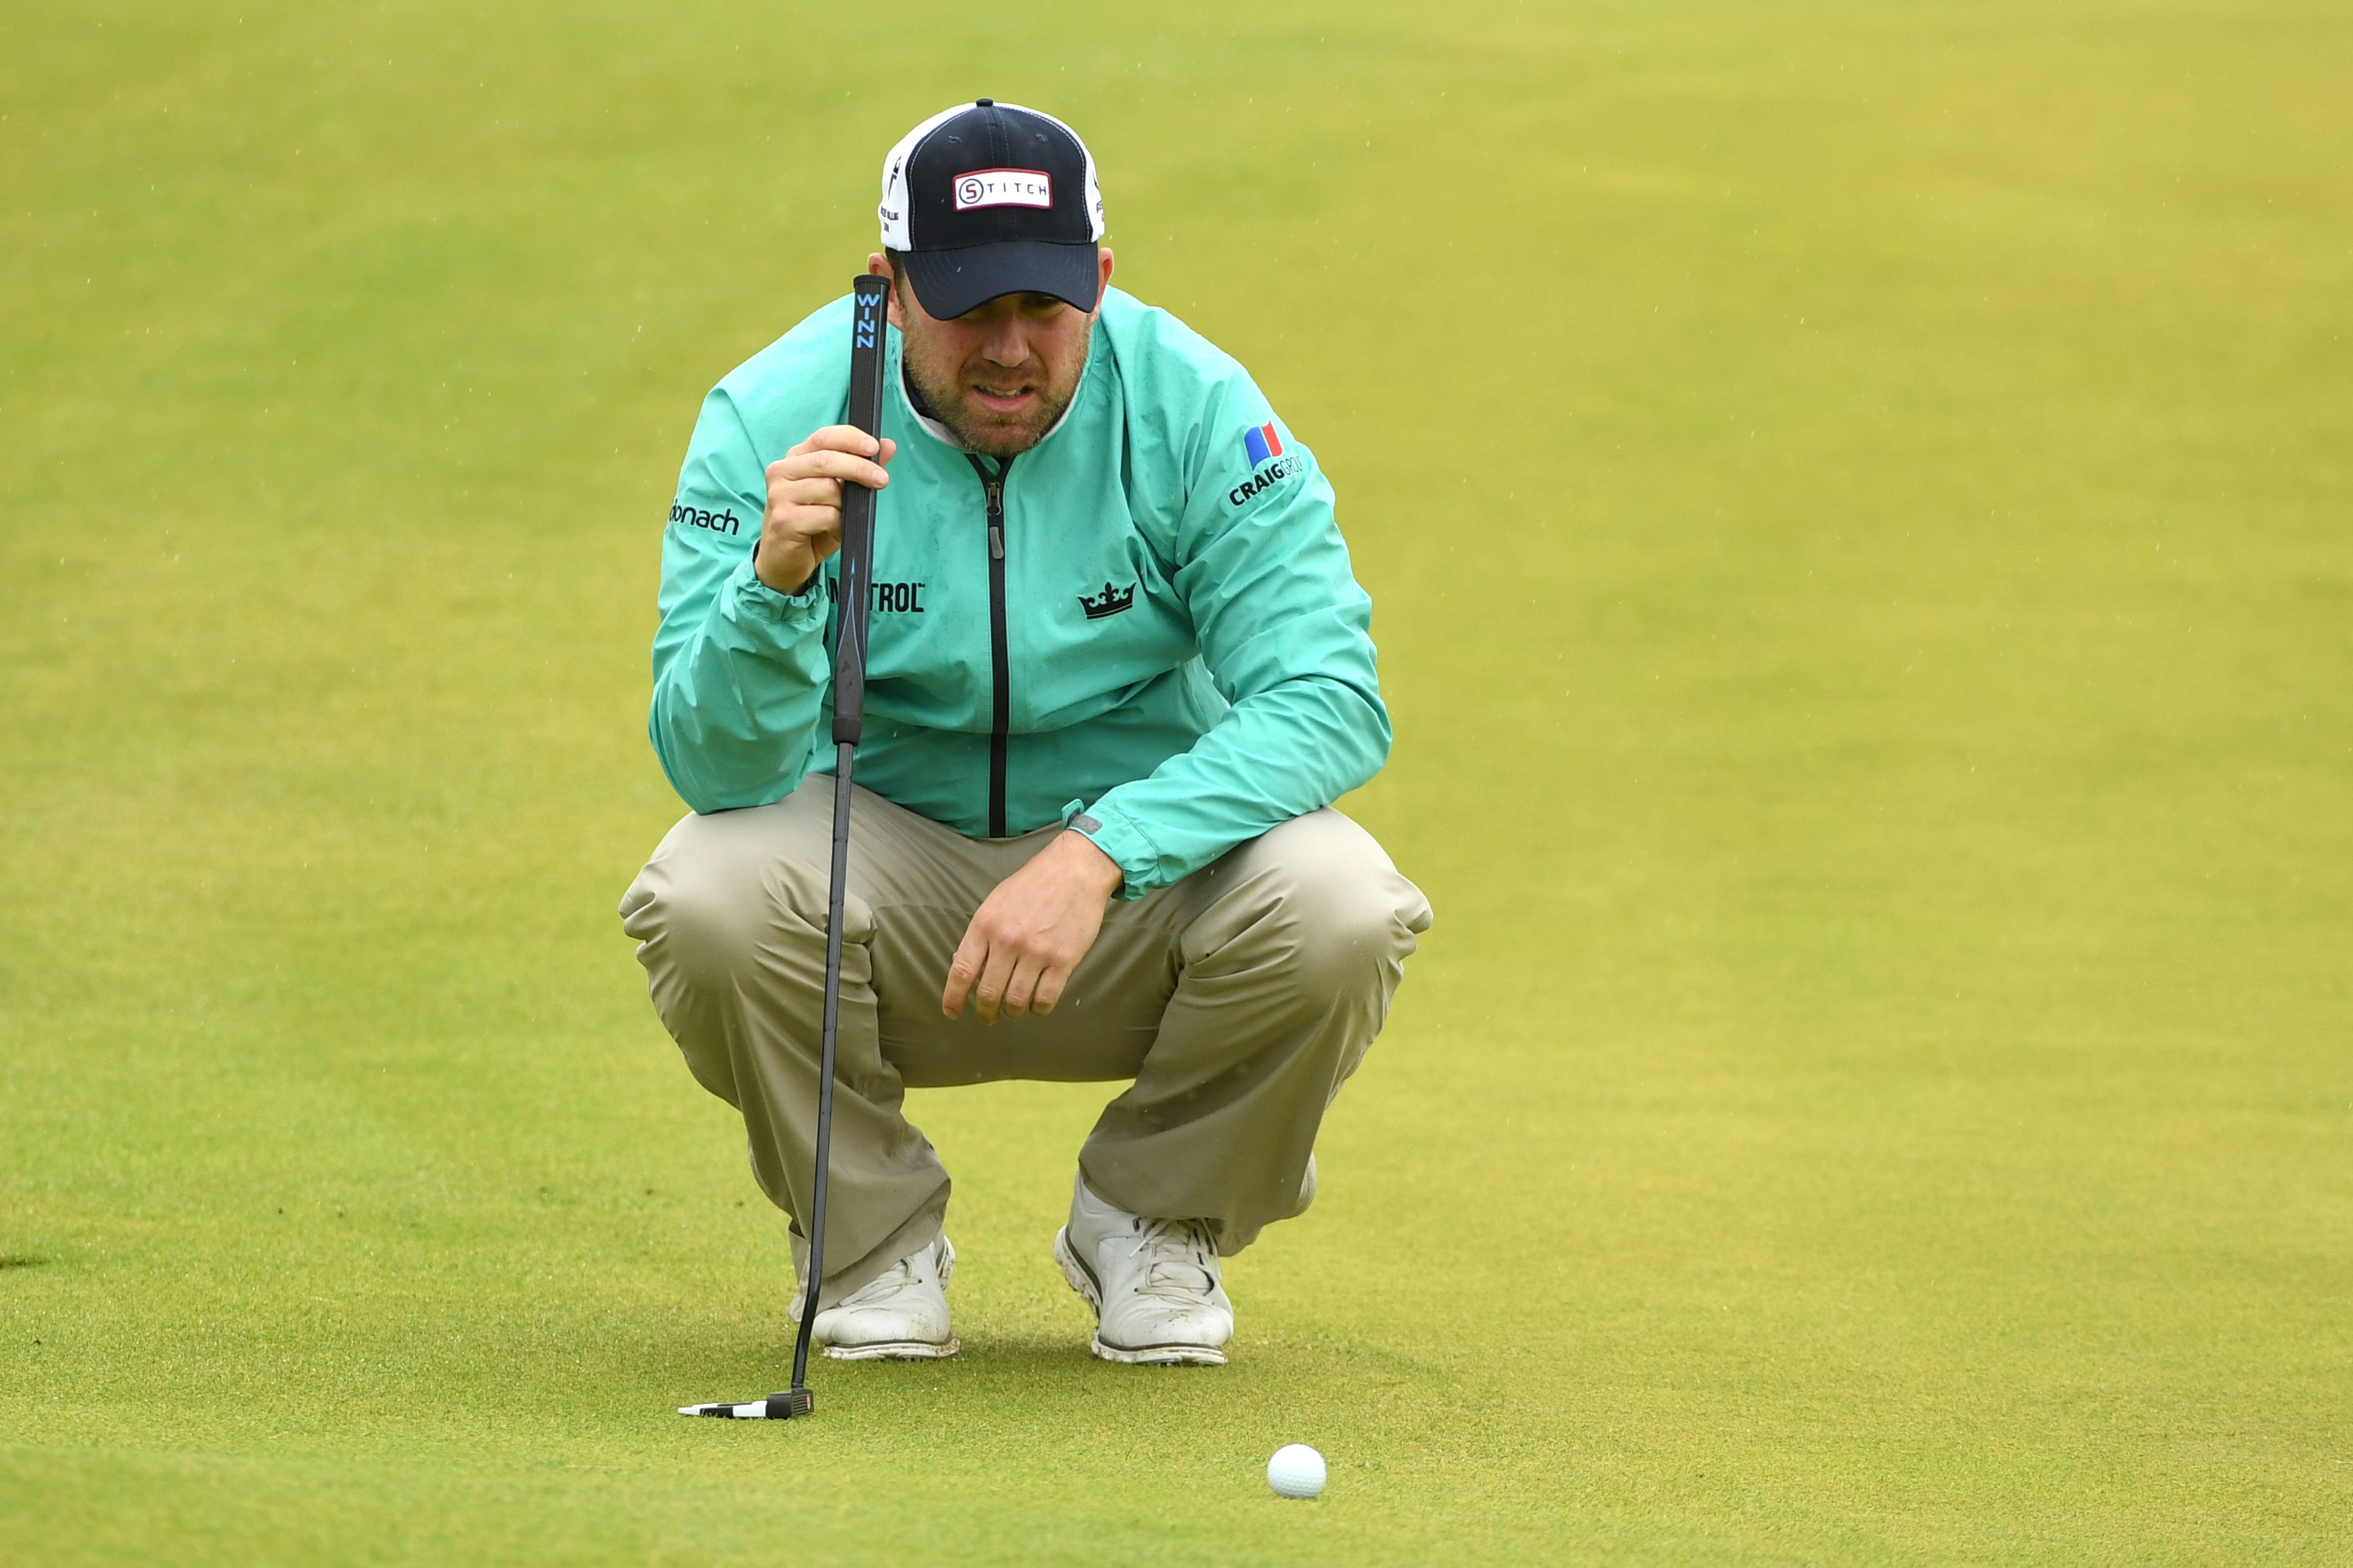 Richie Ramsay will play in his seventh Open at Royal Birkdale after finished tied second in the DDF Irish Open.